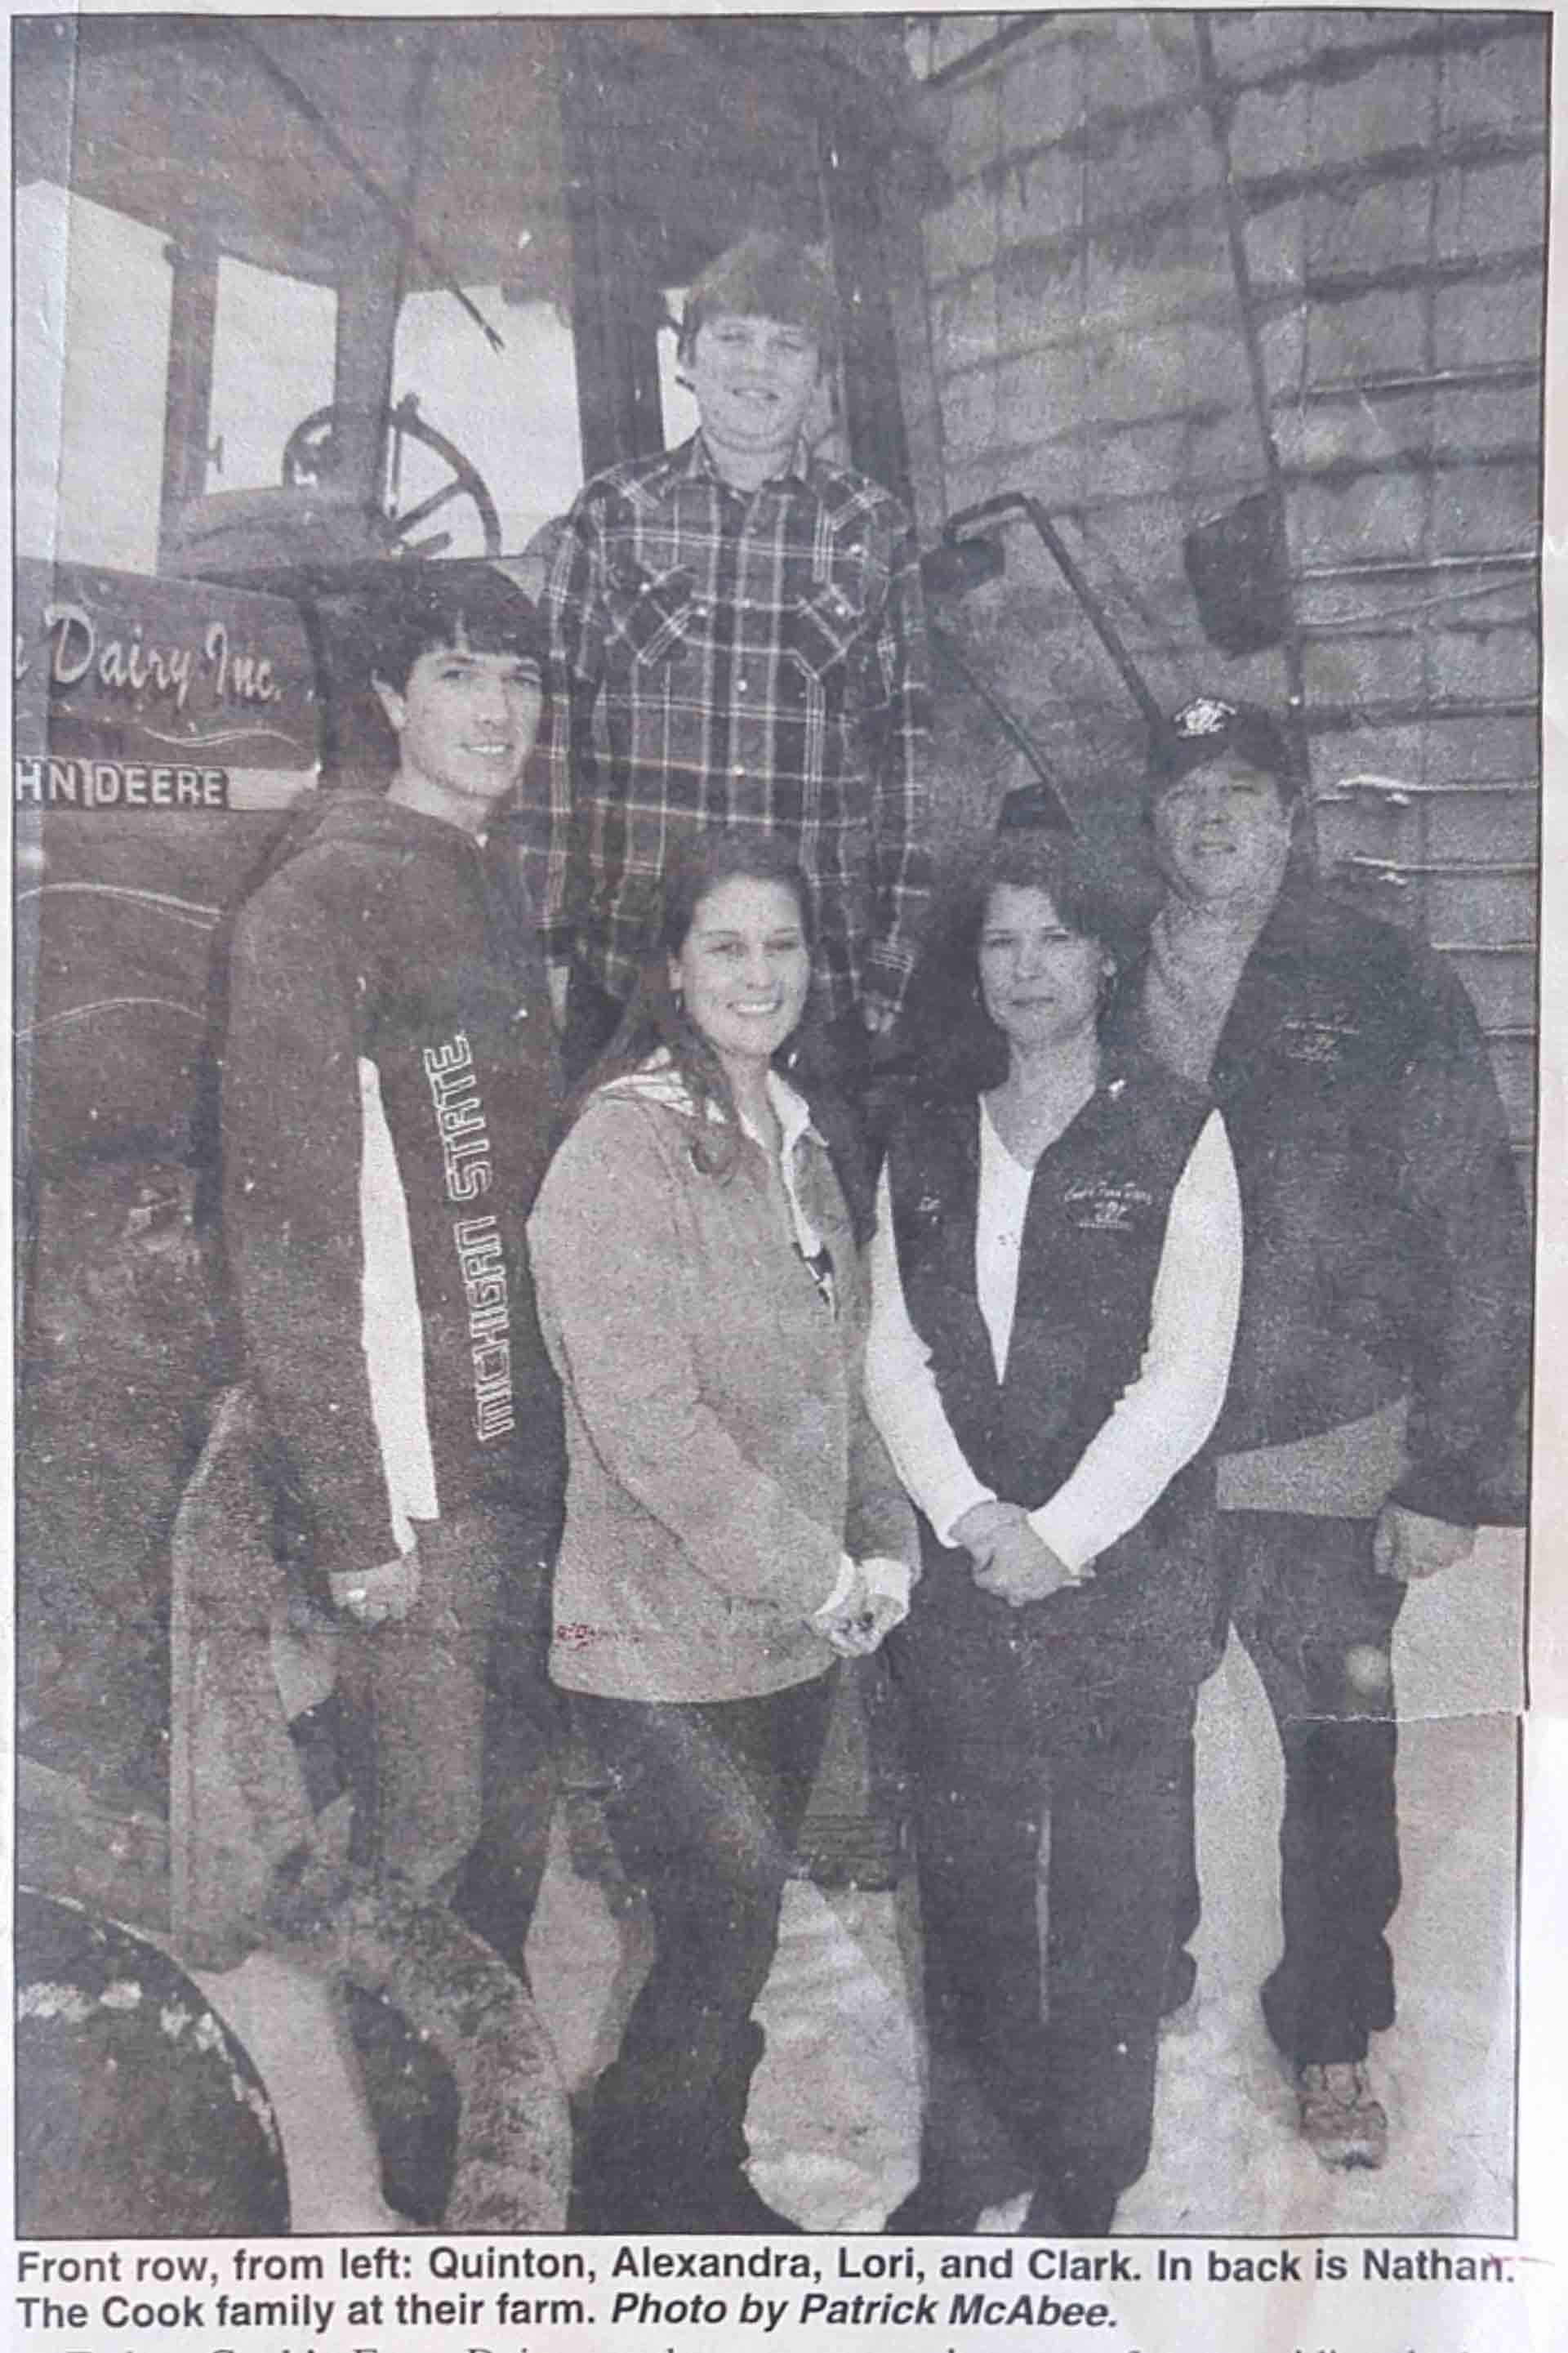 Cooks Farm Dairy Family Pictured on Tractor in front of Silos Photo By The Citizen Ortonville, Michigan